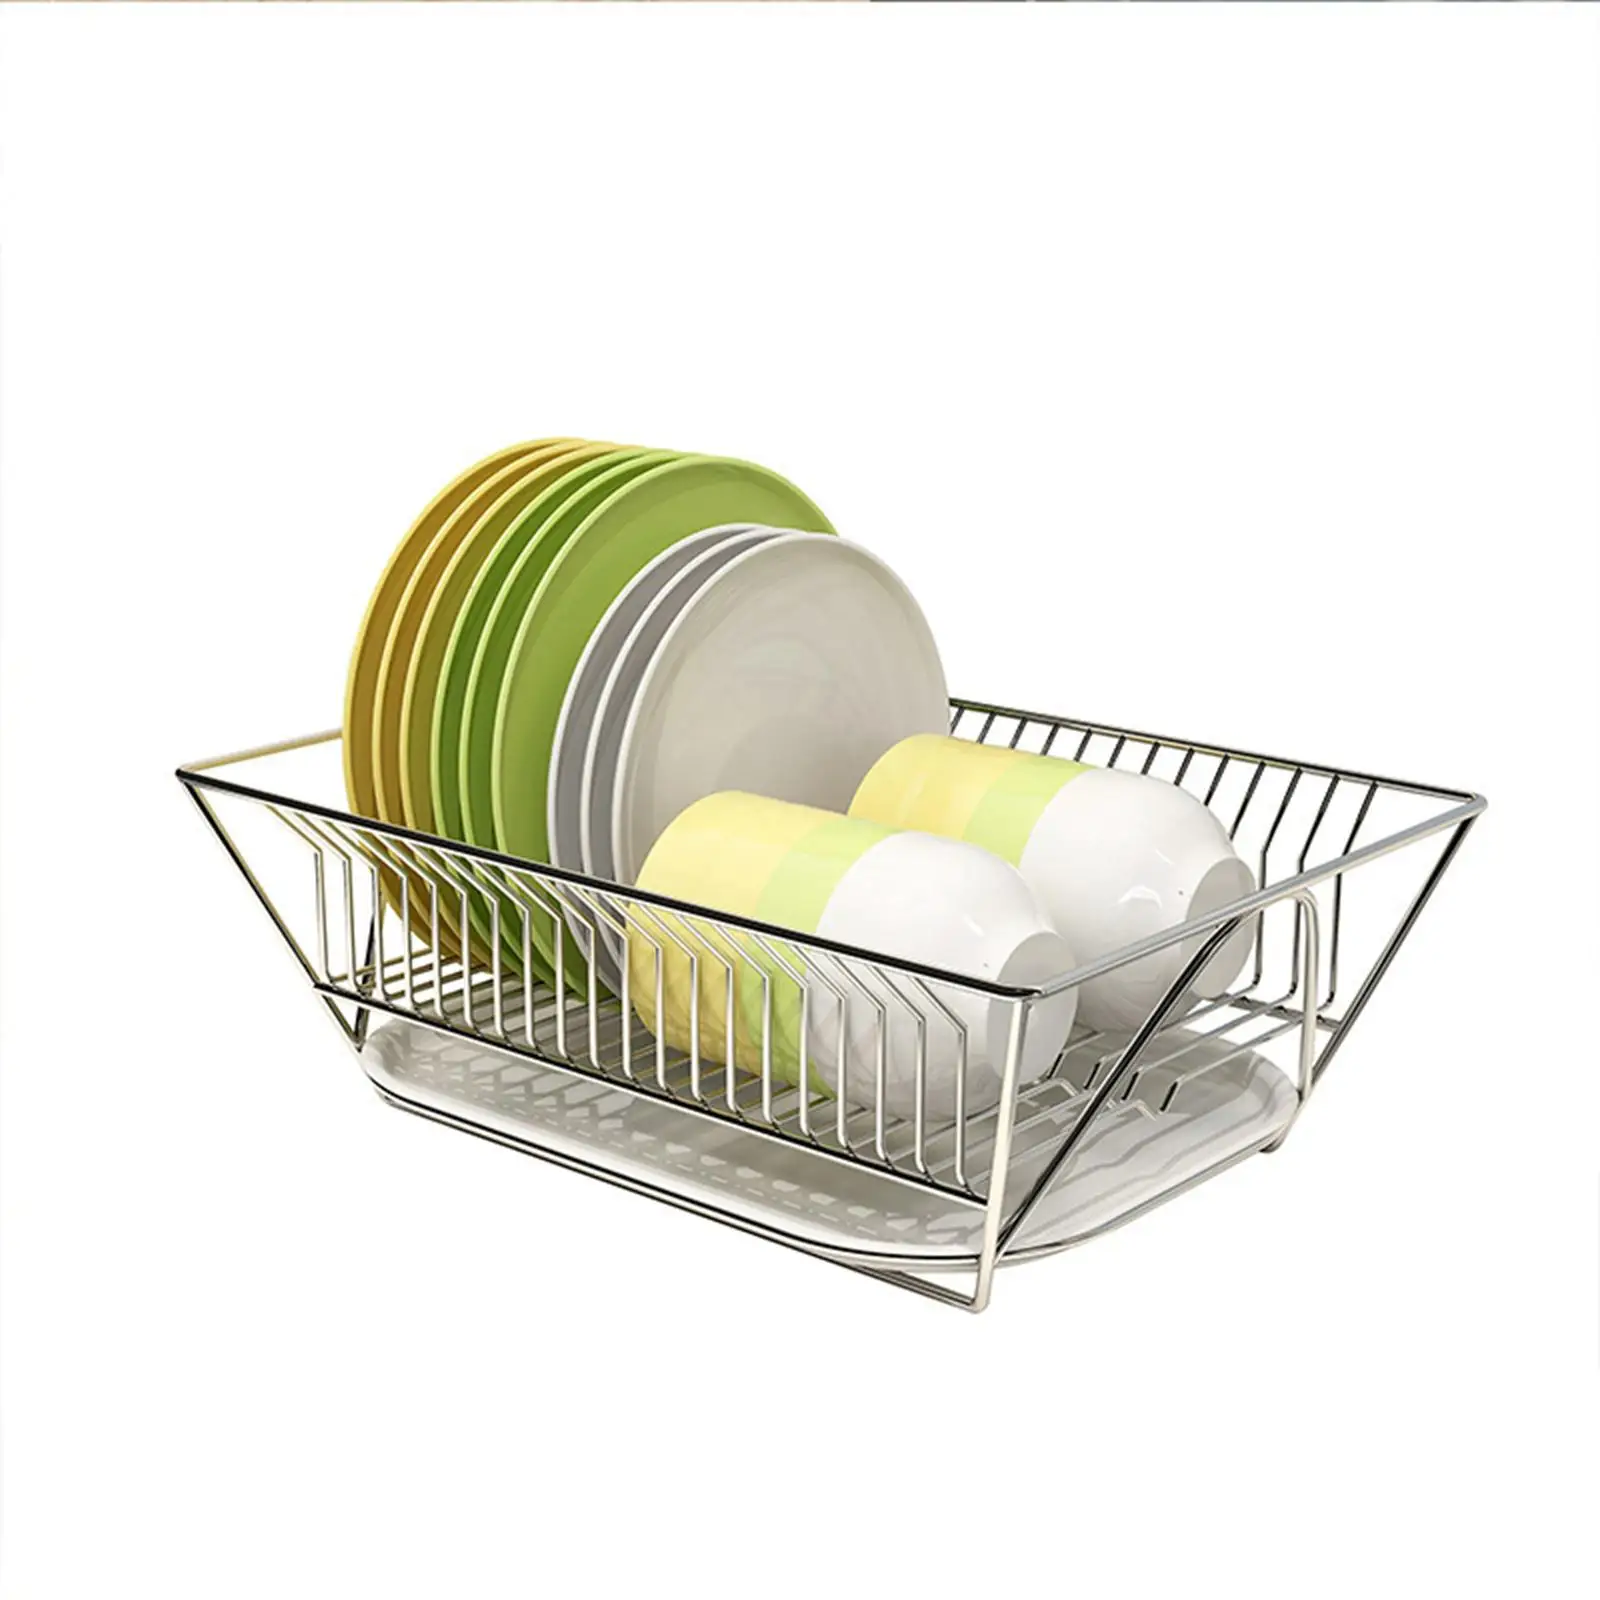 Dish Rack with Drainboard Storage Steel Dish Drainers Cabinet for Kitchen Counter Removable Shelf Organizer Kitchen Drying Rack